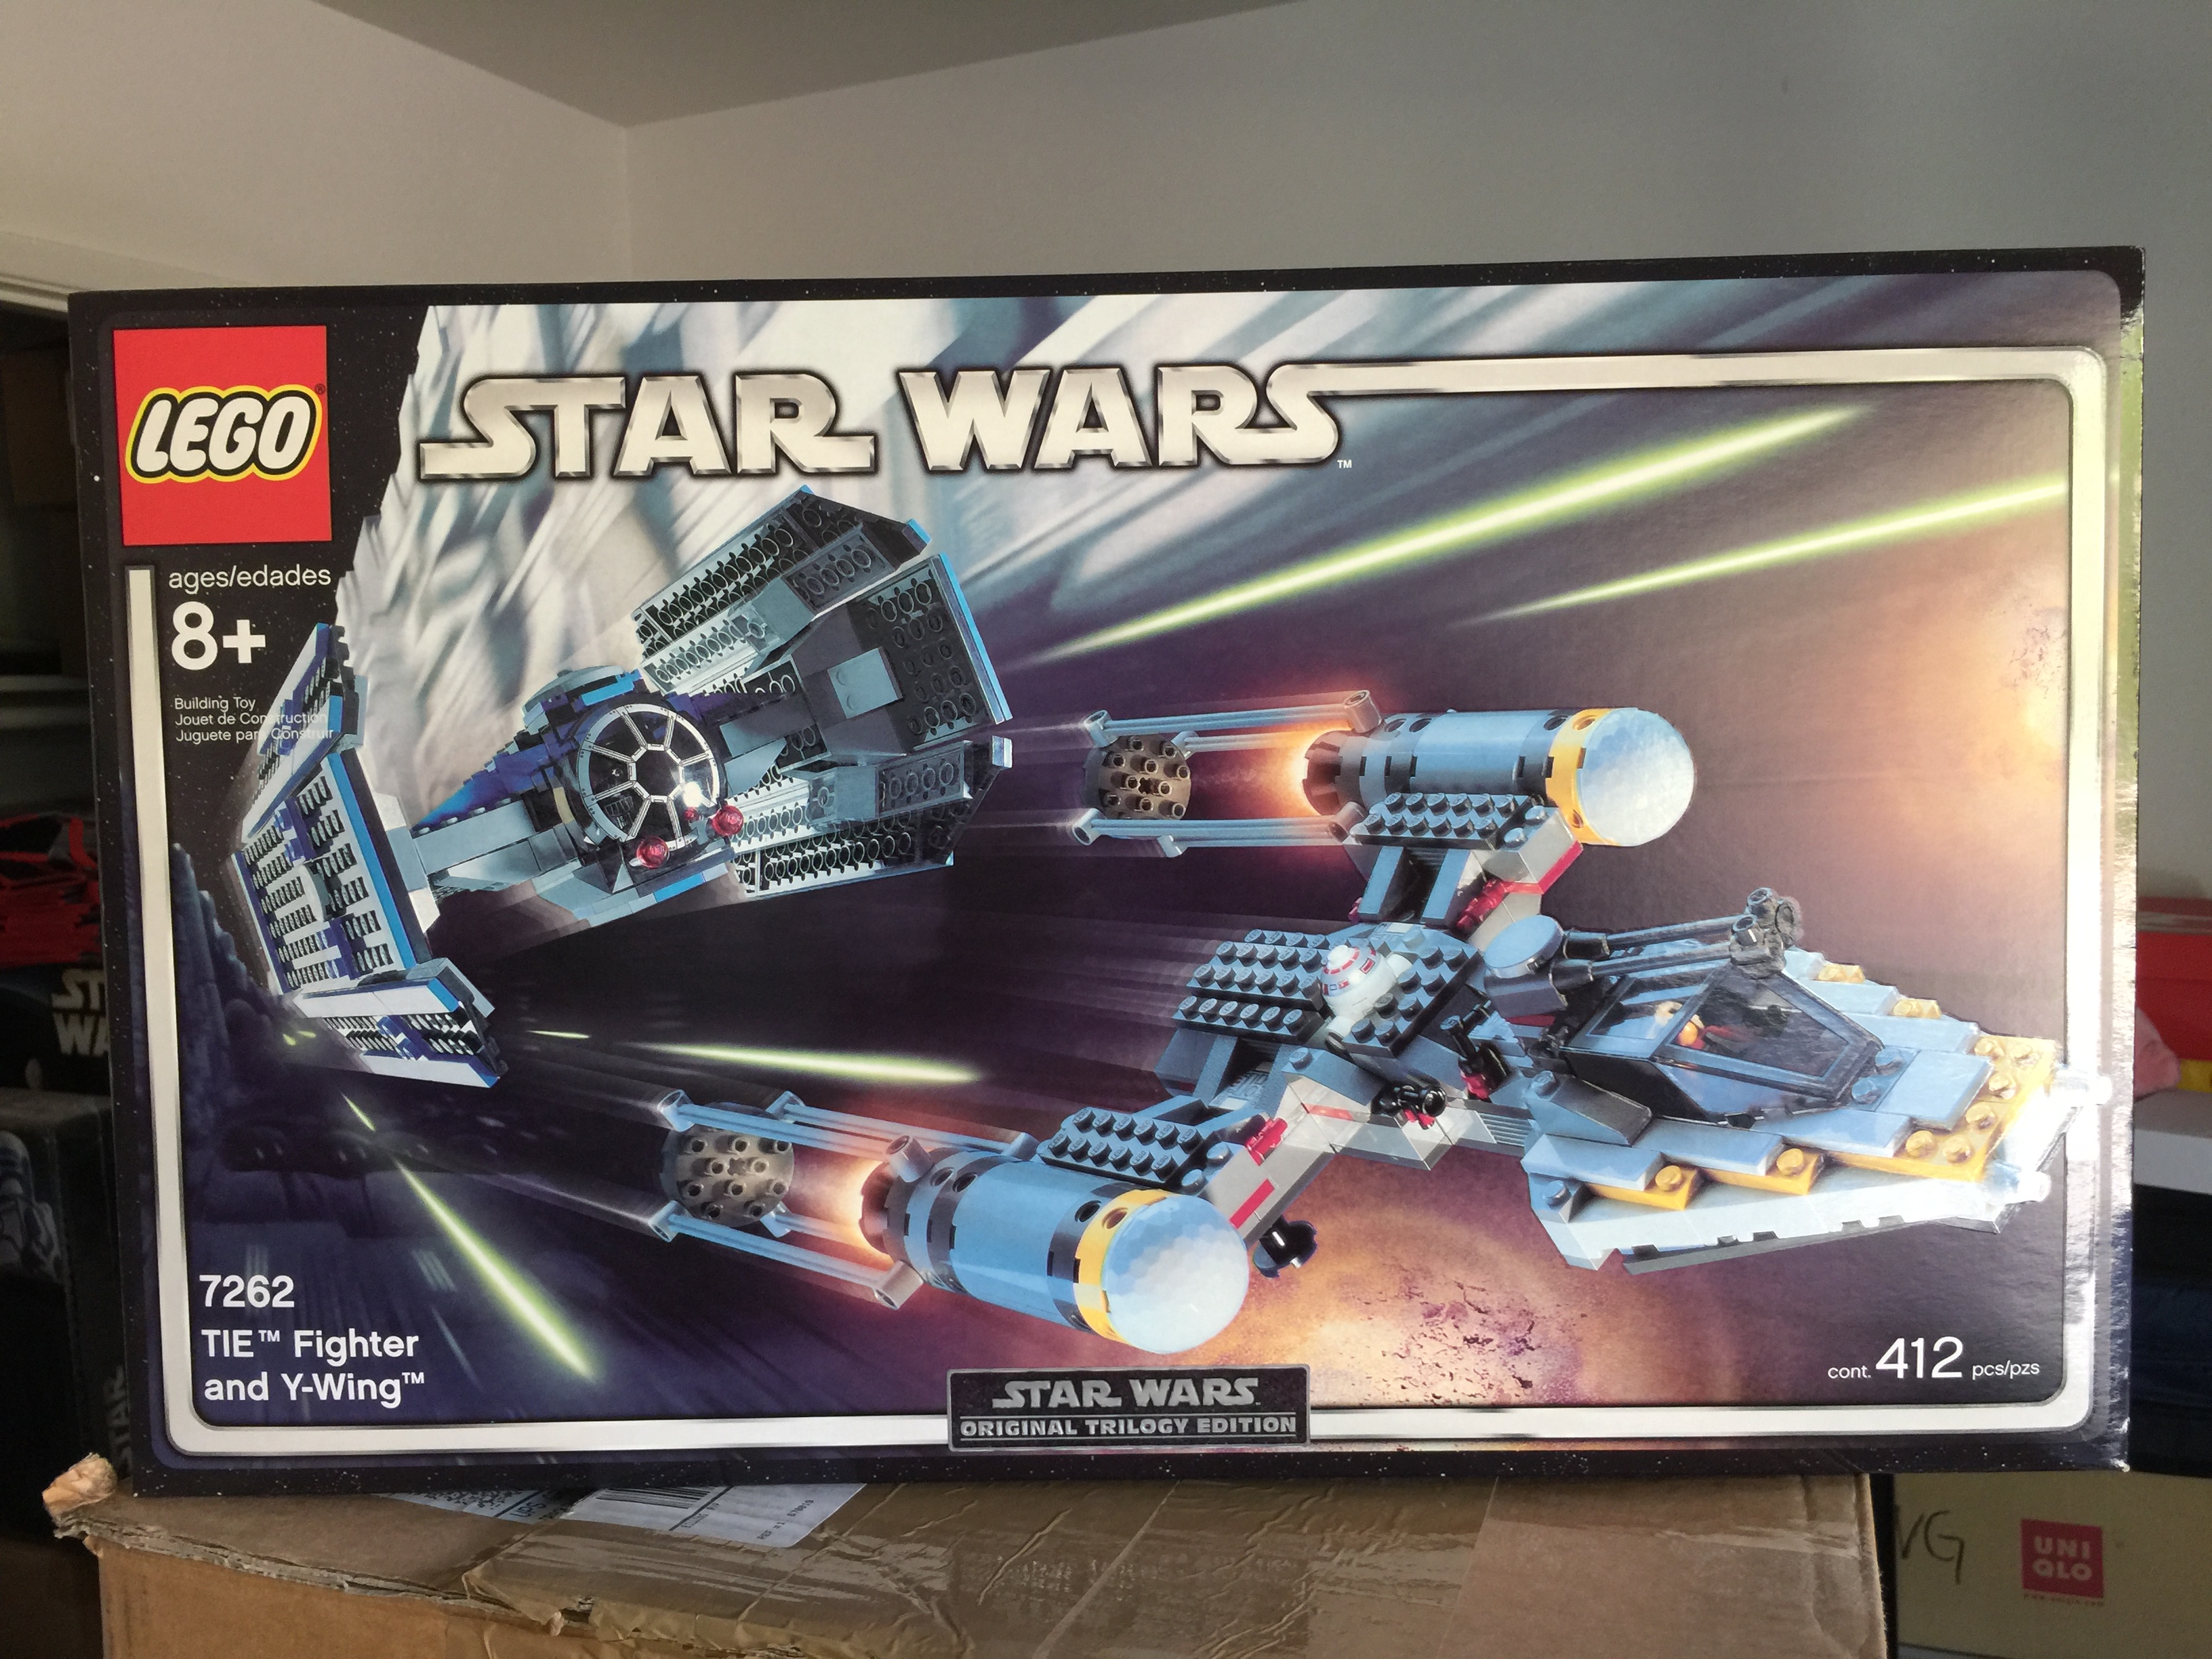 Some Of The Best And Worst LEGO Star Wars Package Designs - FBTB